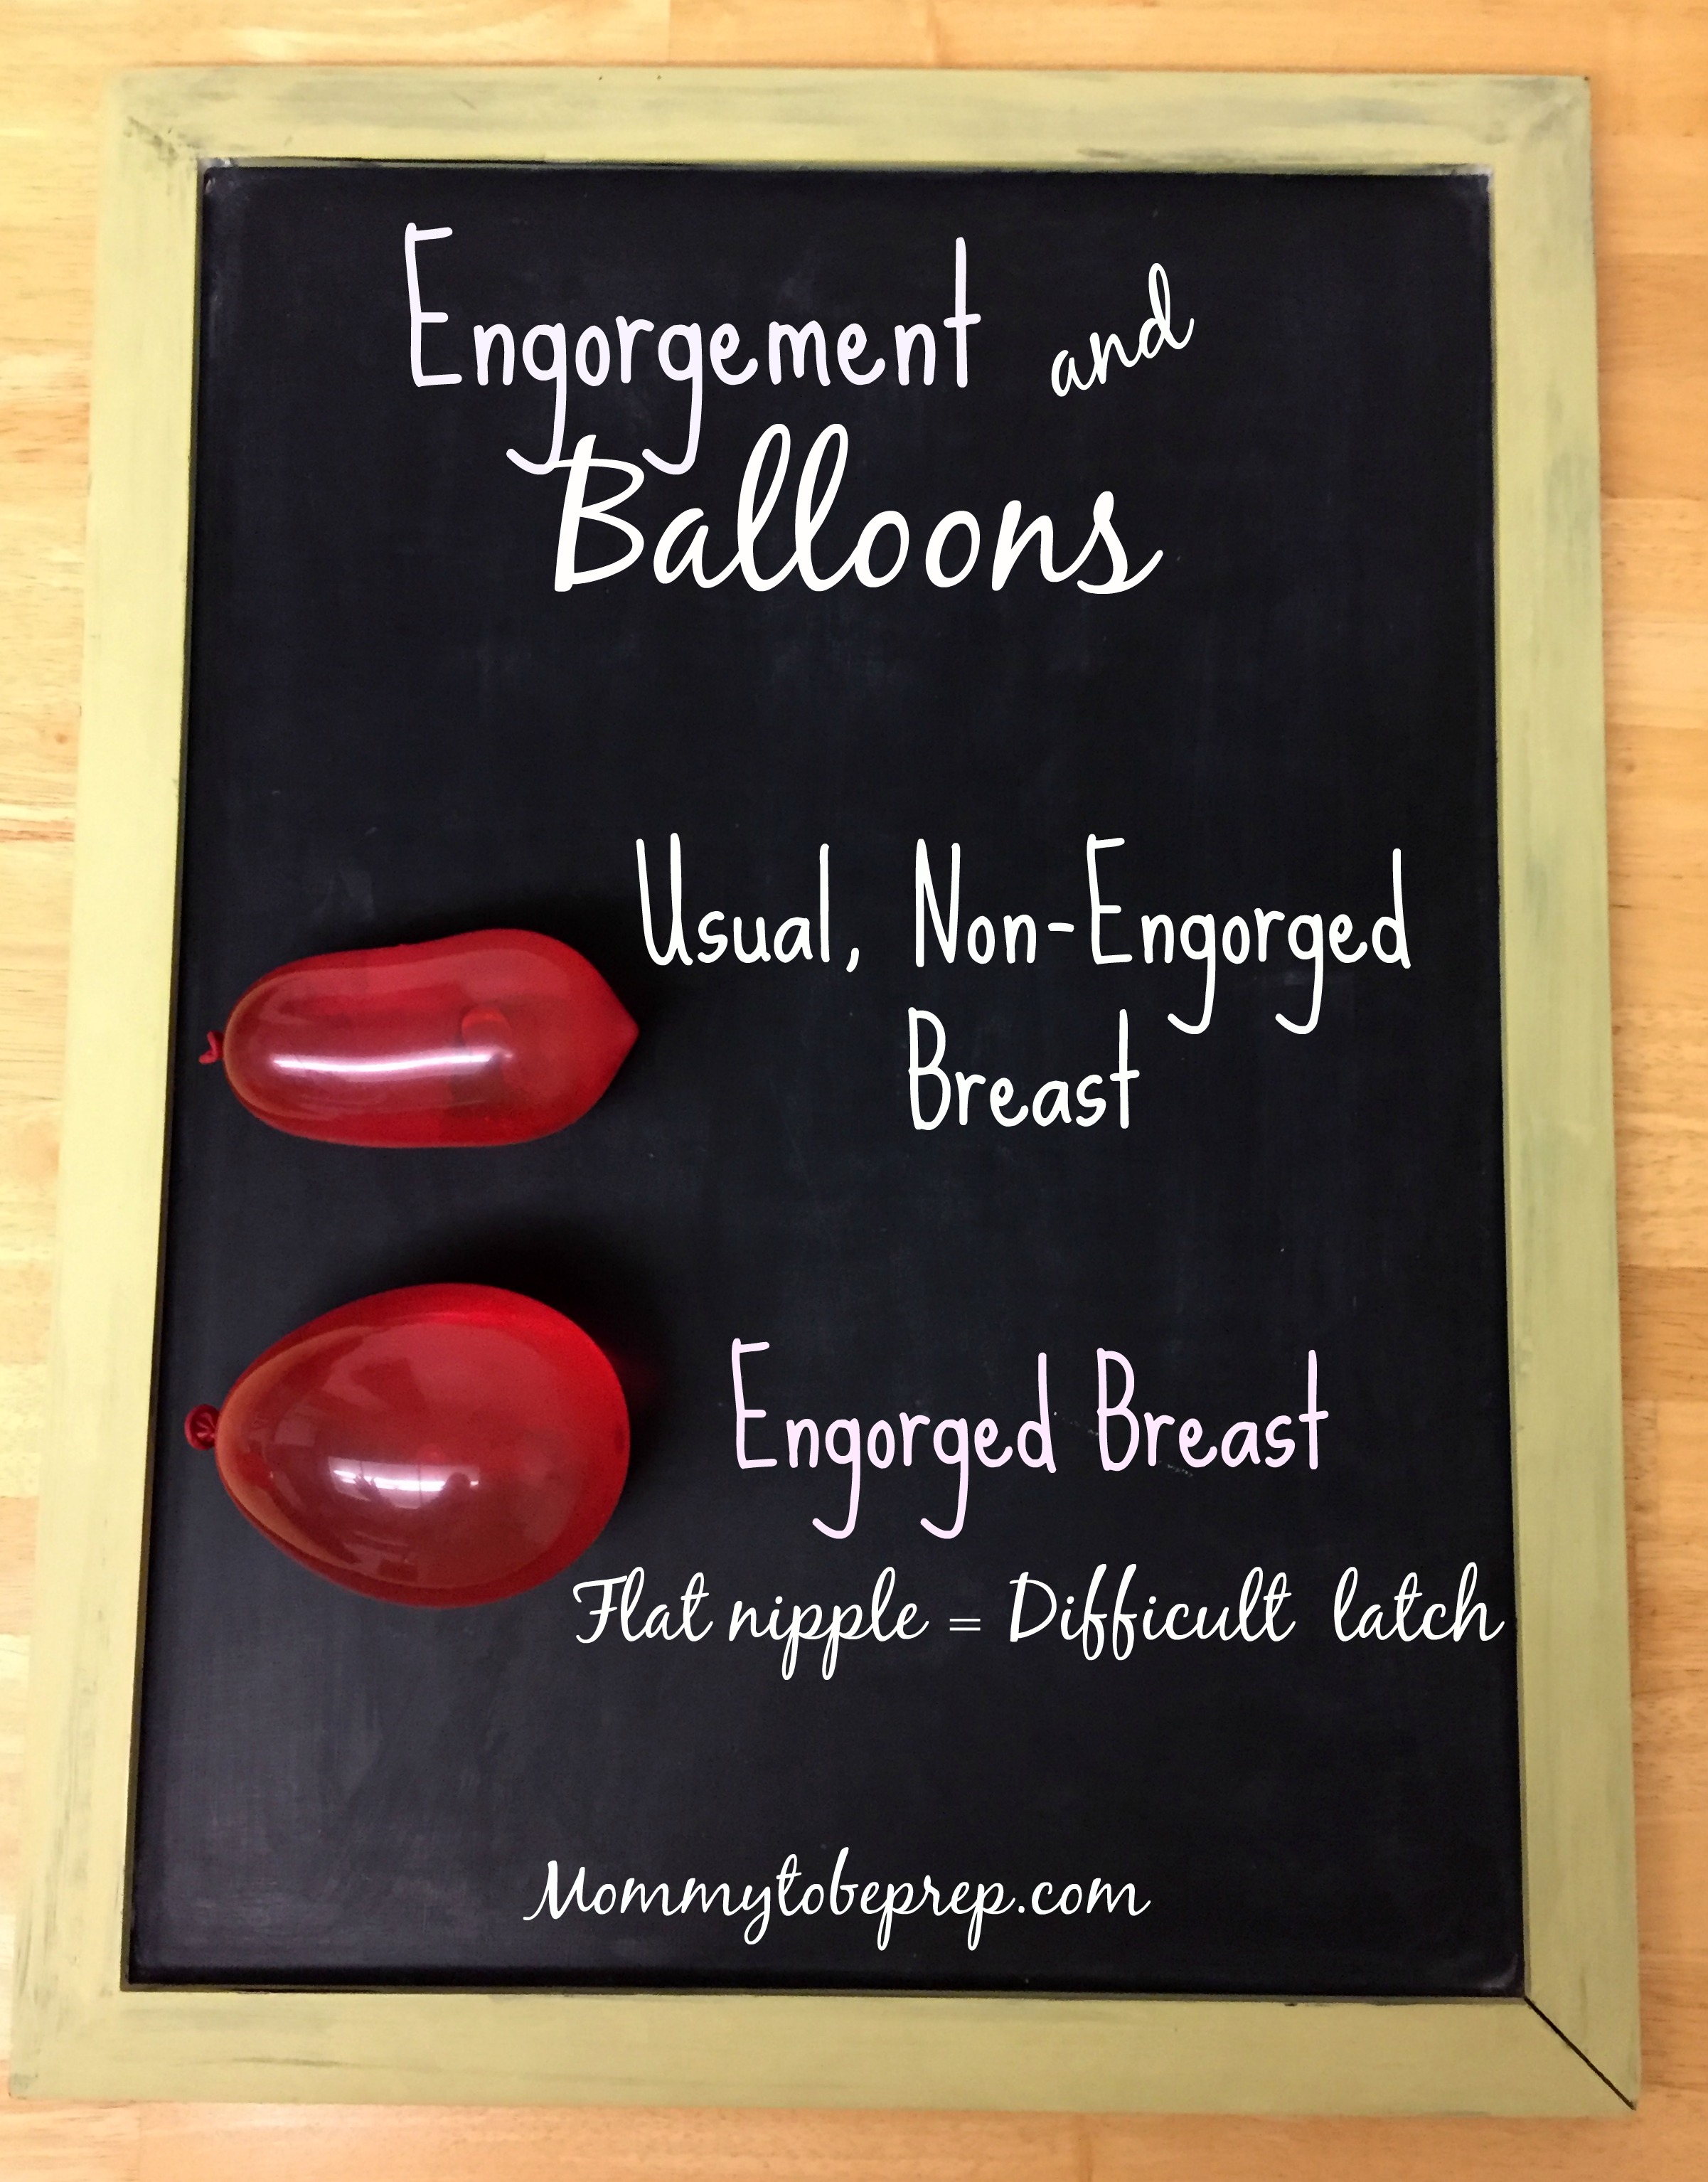 engorgement and balloons